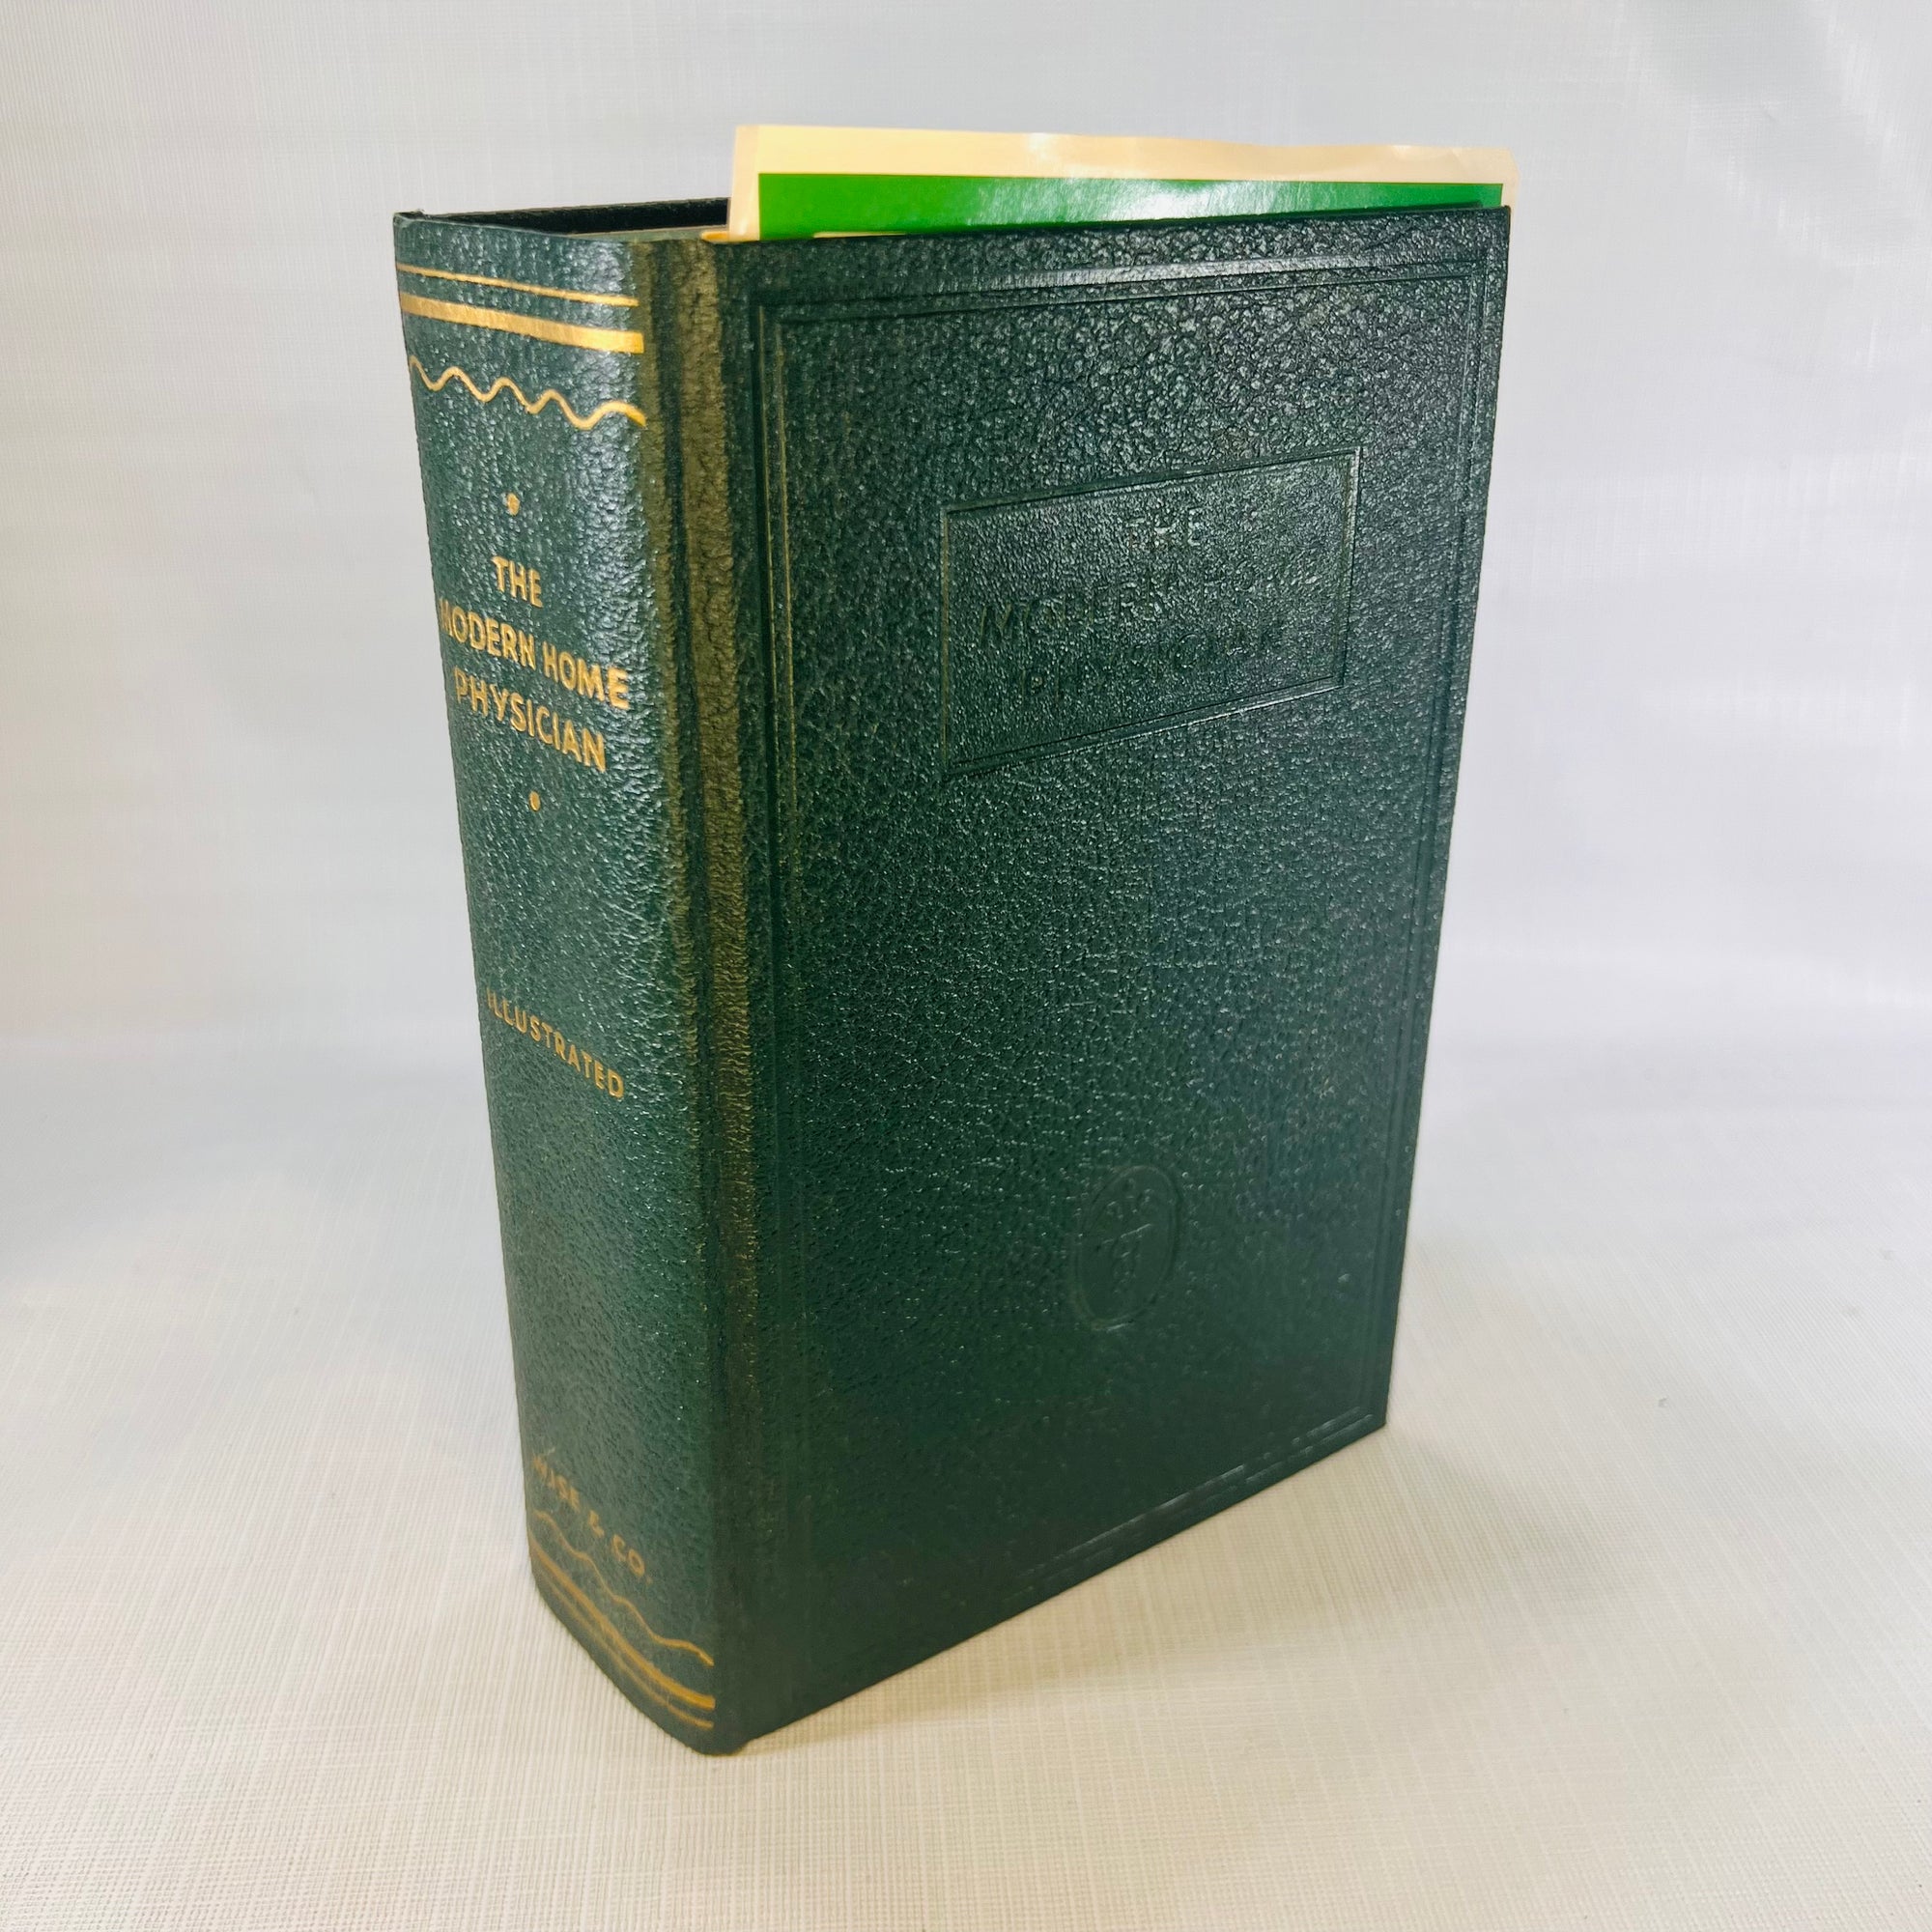 The Modern Home Physician Thumb Tab Edited by Victor Robinson Ph.C 1939 Wm. H. Wise and Company Vintage Book